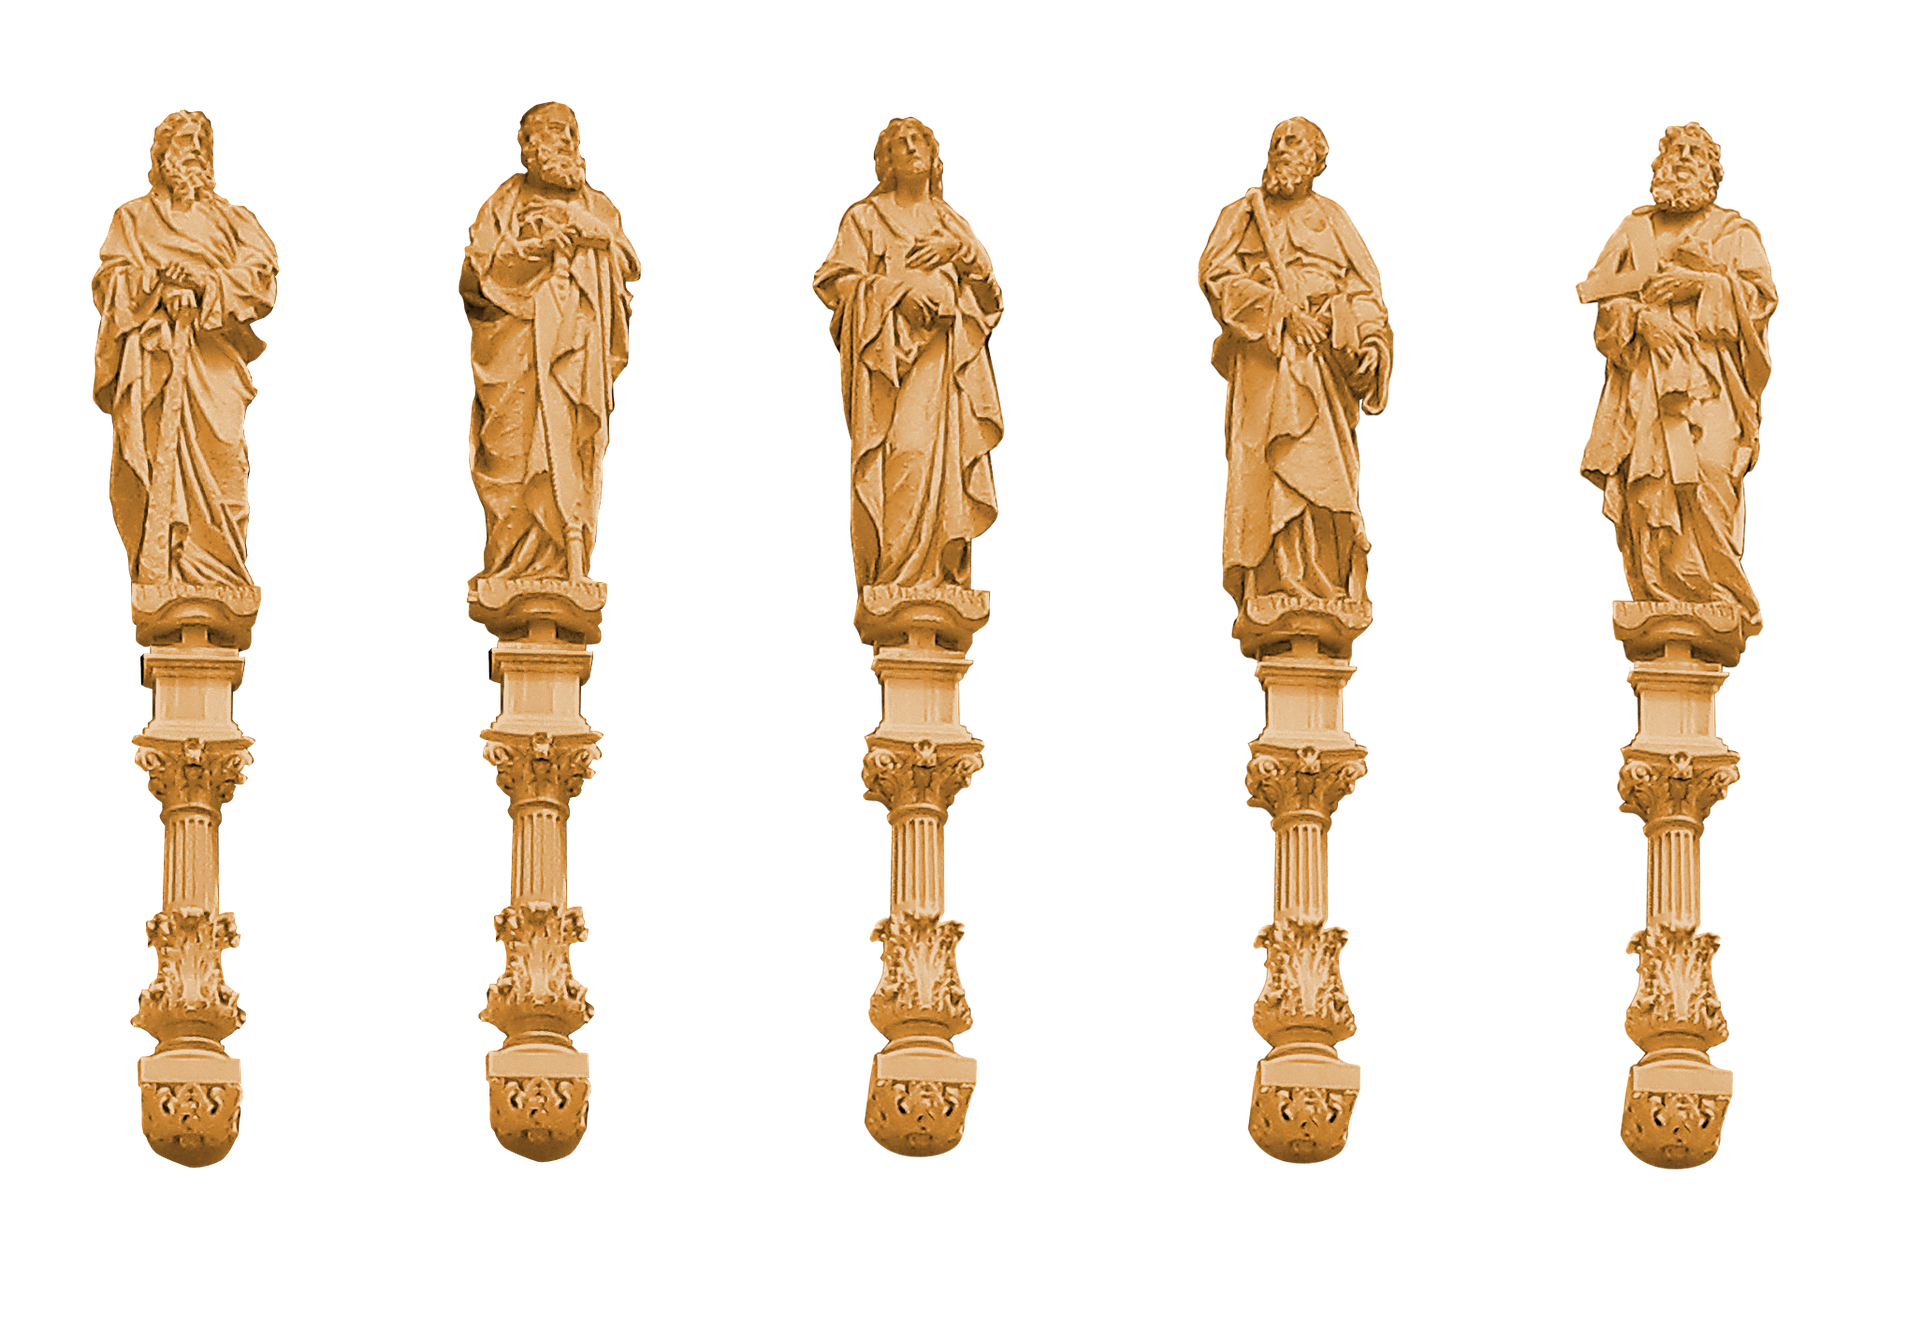 A Group Of Statues On Pillars